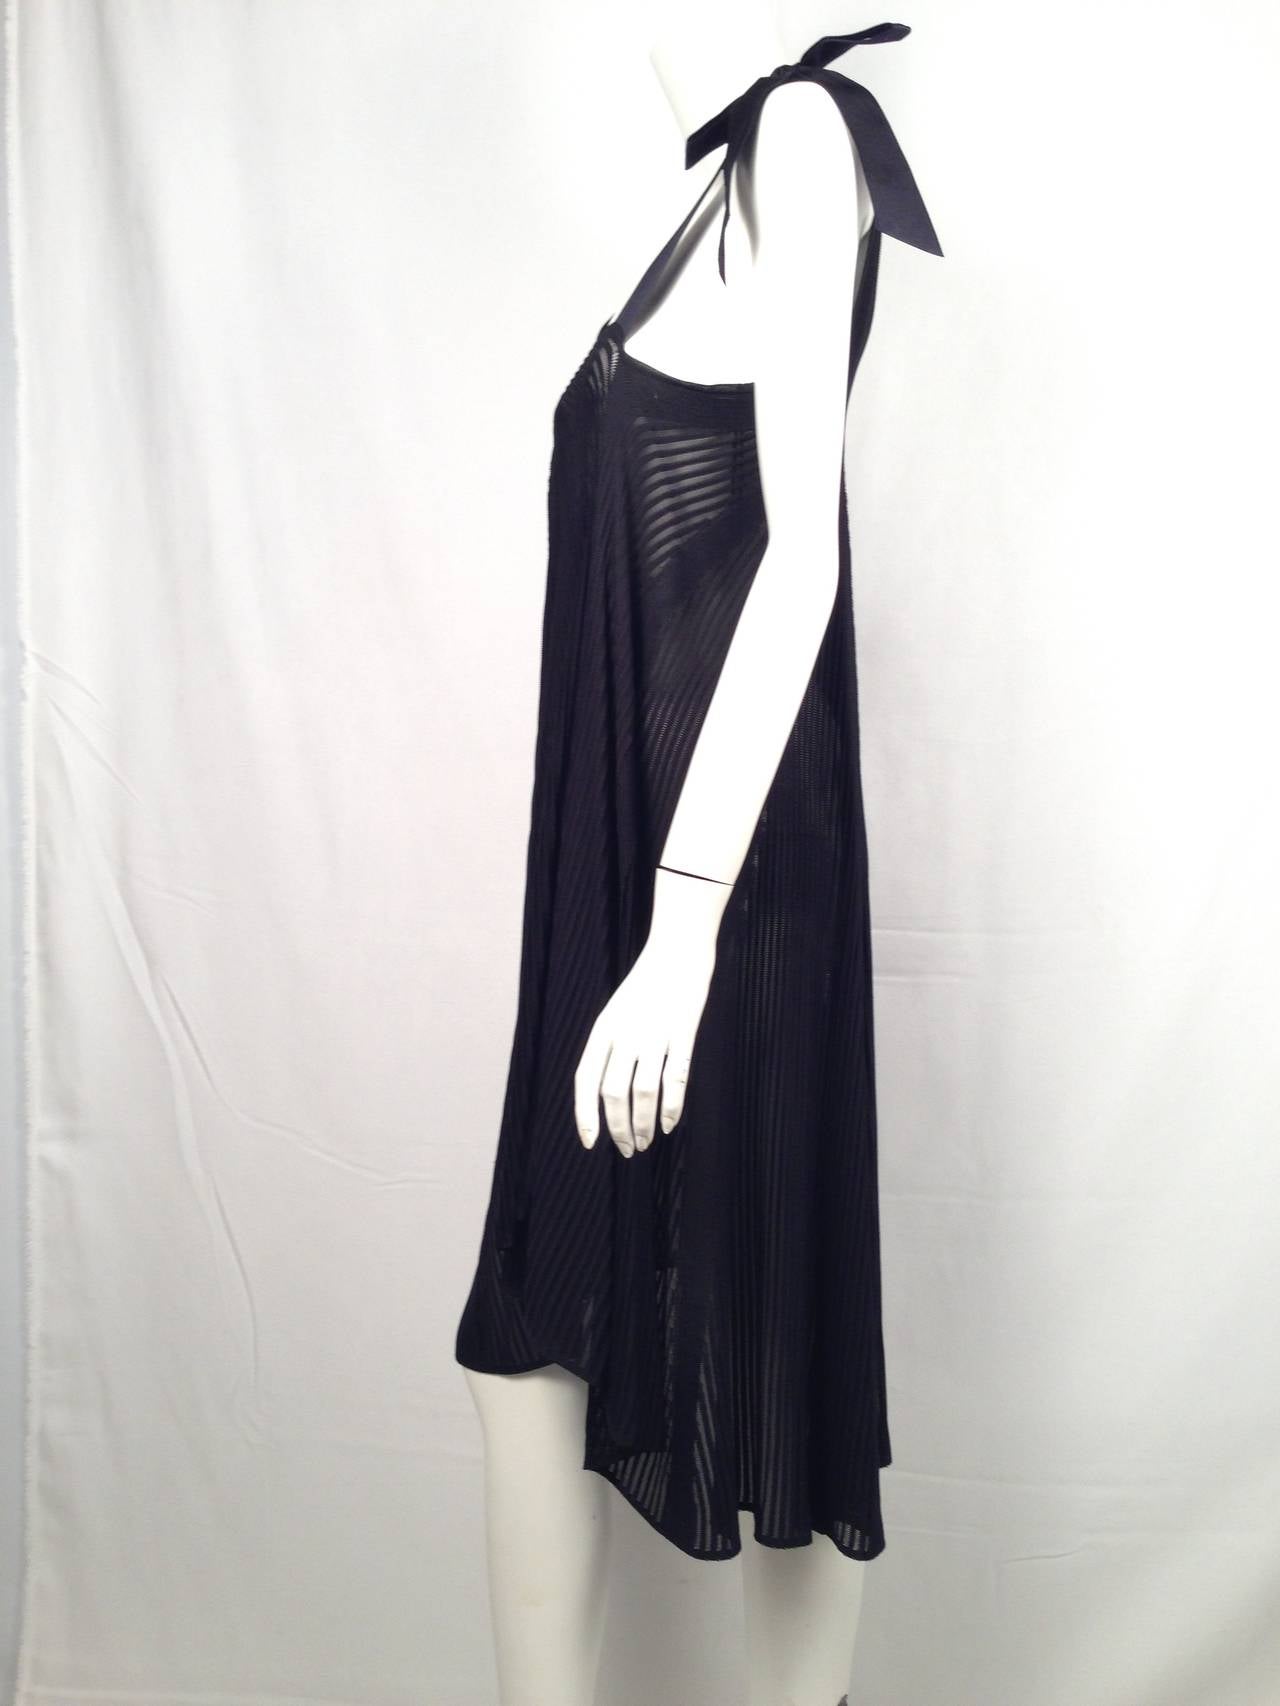 Chanel Black Knit Trapeze Dress With Silk Satin Ribbon Straps and Bow For Sale 3